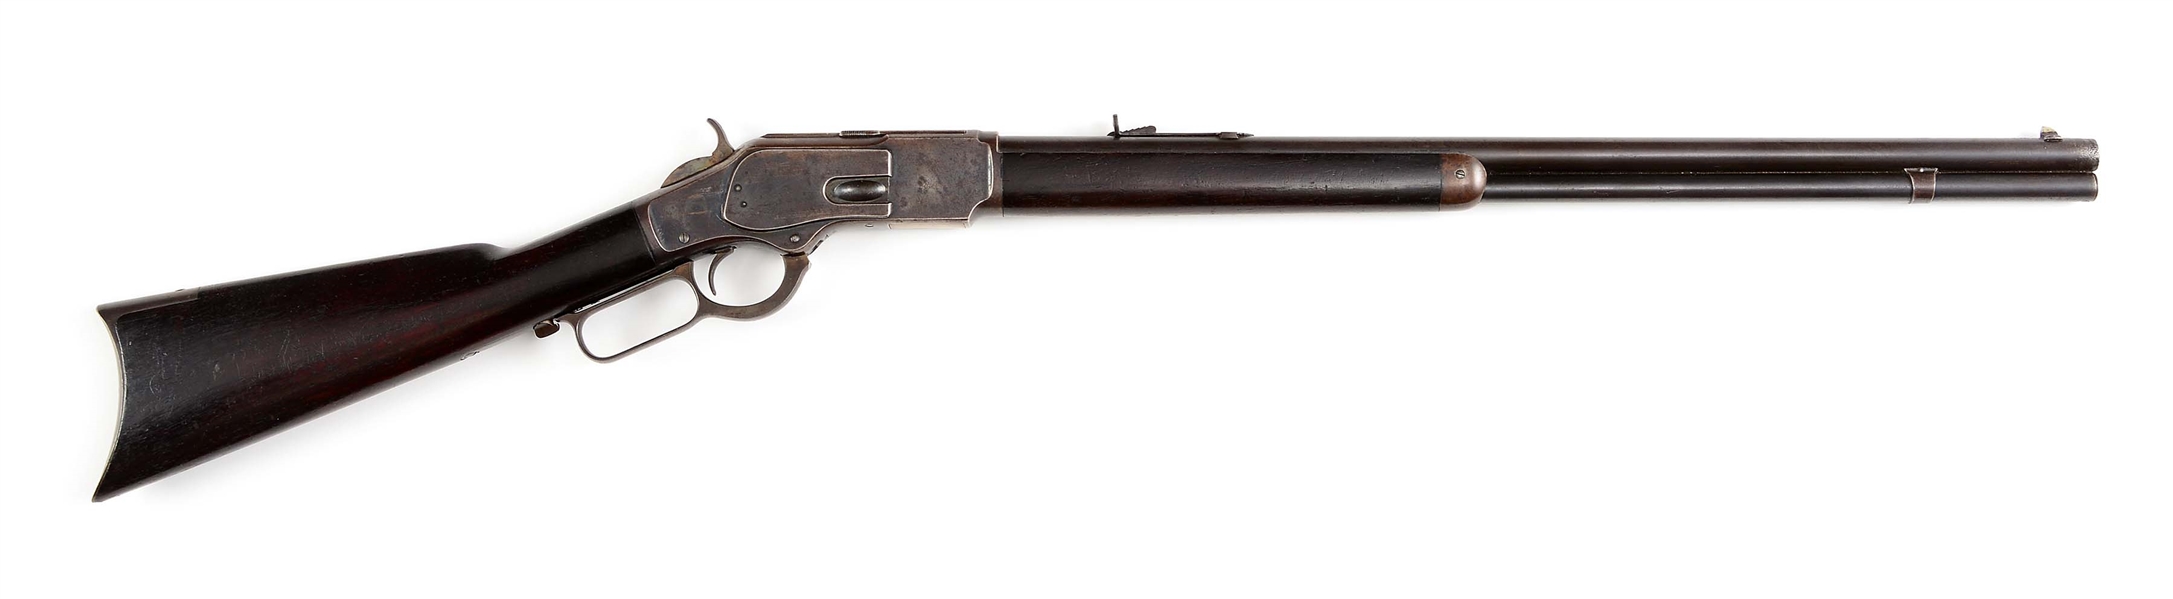 (A) ANTIQUE WINCHESTER MODEL 1873 LEVER ACTION RIFLE (1890).